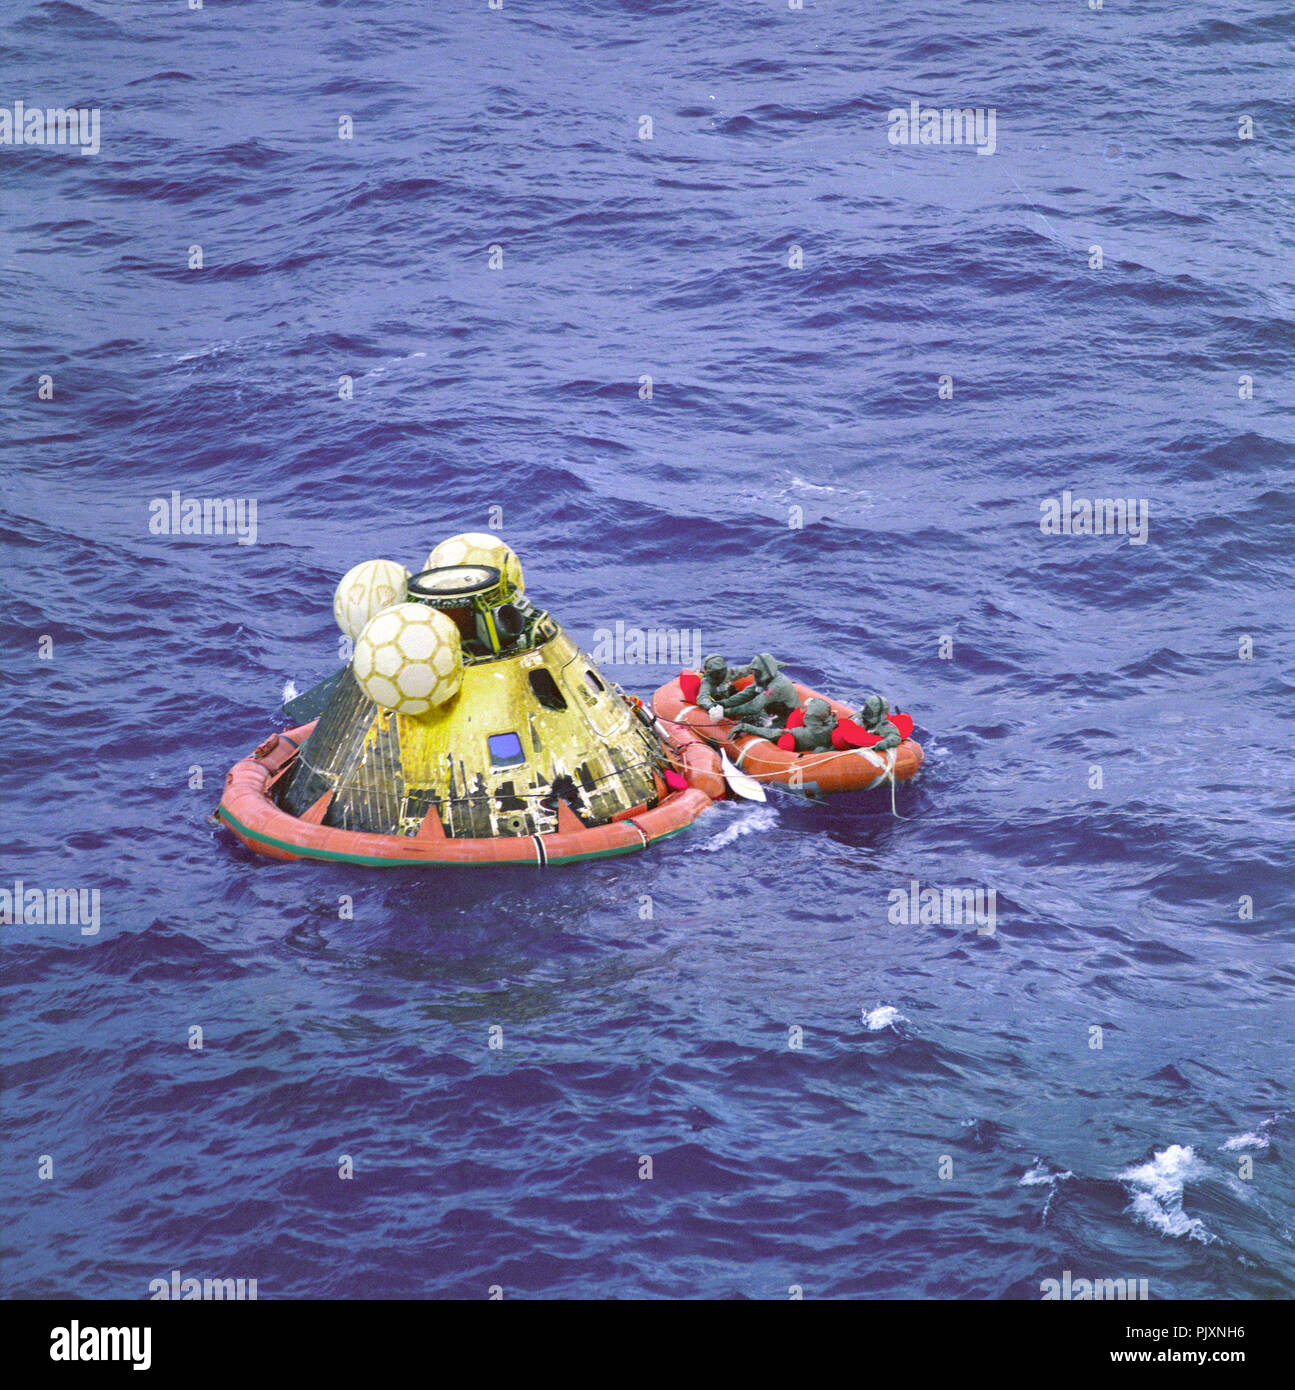 Houston, TX - (FILE) -- The Apollo 11 crew await pickup by a helicopter from the USS Hornet, prime recovery ship for the historic Apollo 11 lunar landing mission on Thursday, July 24,1969. The fourth man in the life raft is a United States Navy underwater demolition team swimmer. All four men are wearing Biological Isolation Garments (BIG). The Apollo 11 Command Module 'Columbia,' with astronauts Neil A. Armstrong, Michael Collins, and Edwin E. Aldrin Jr. splashed down at 11:49 a.m. (CDT), July 24, 1969, about 812 nautical miles southwest of Hawaii and only 12 nautical miles from the USS Horne Stock Photo